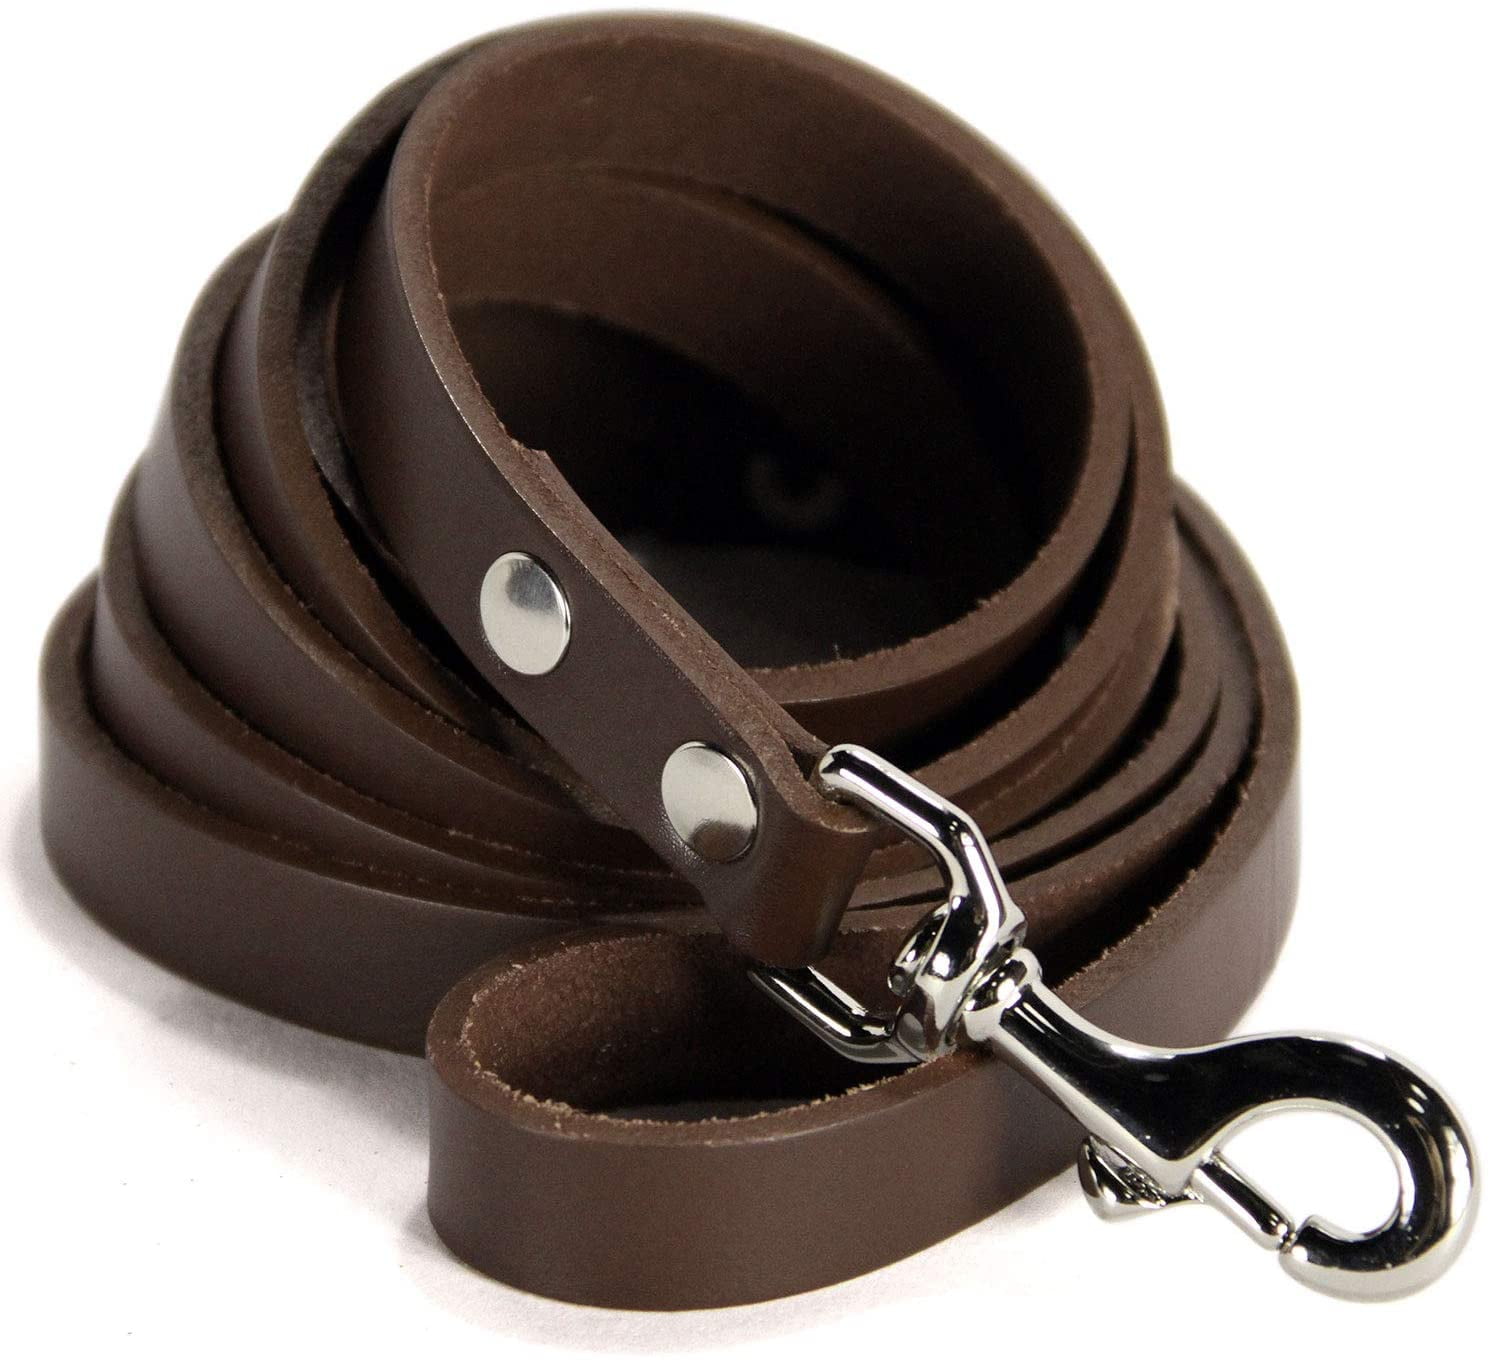 Logical Leather Dog Leash - 6 Foot Heavy Duty Full Grain Leather Lead; Best  for Training - Brown